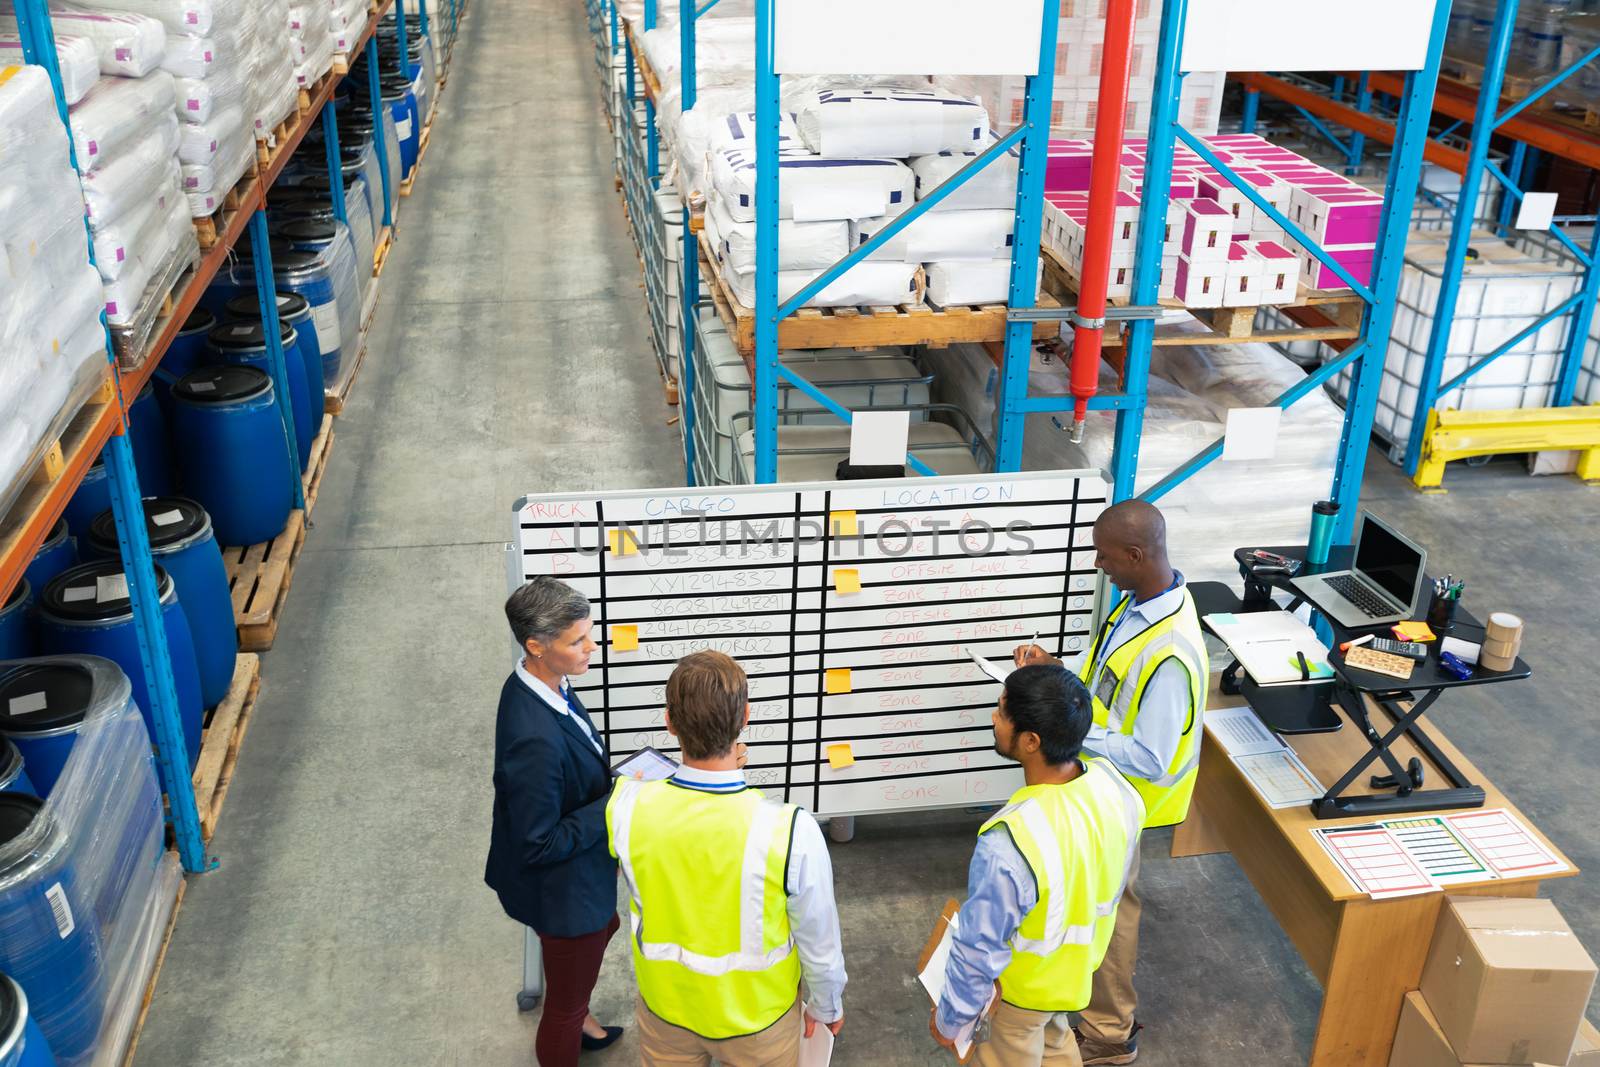 Warehouse staff discussing over whiteboard in warehouse by Wavebreakmedia